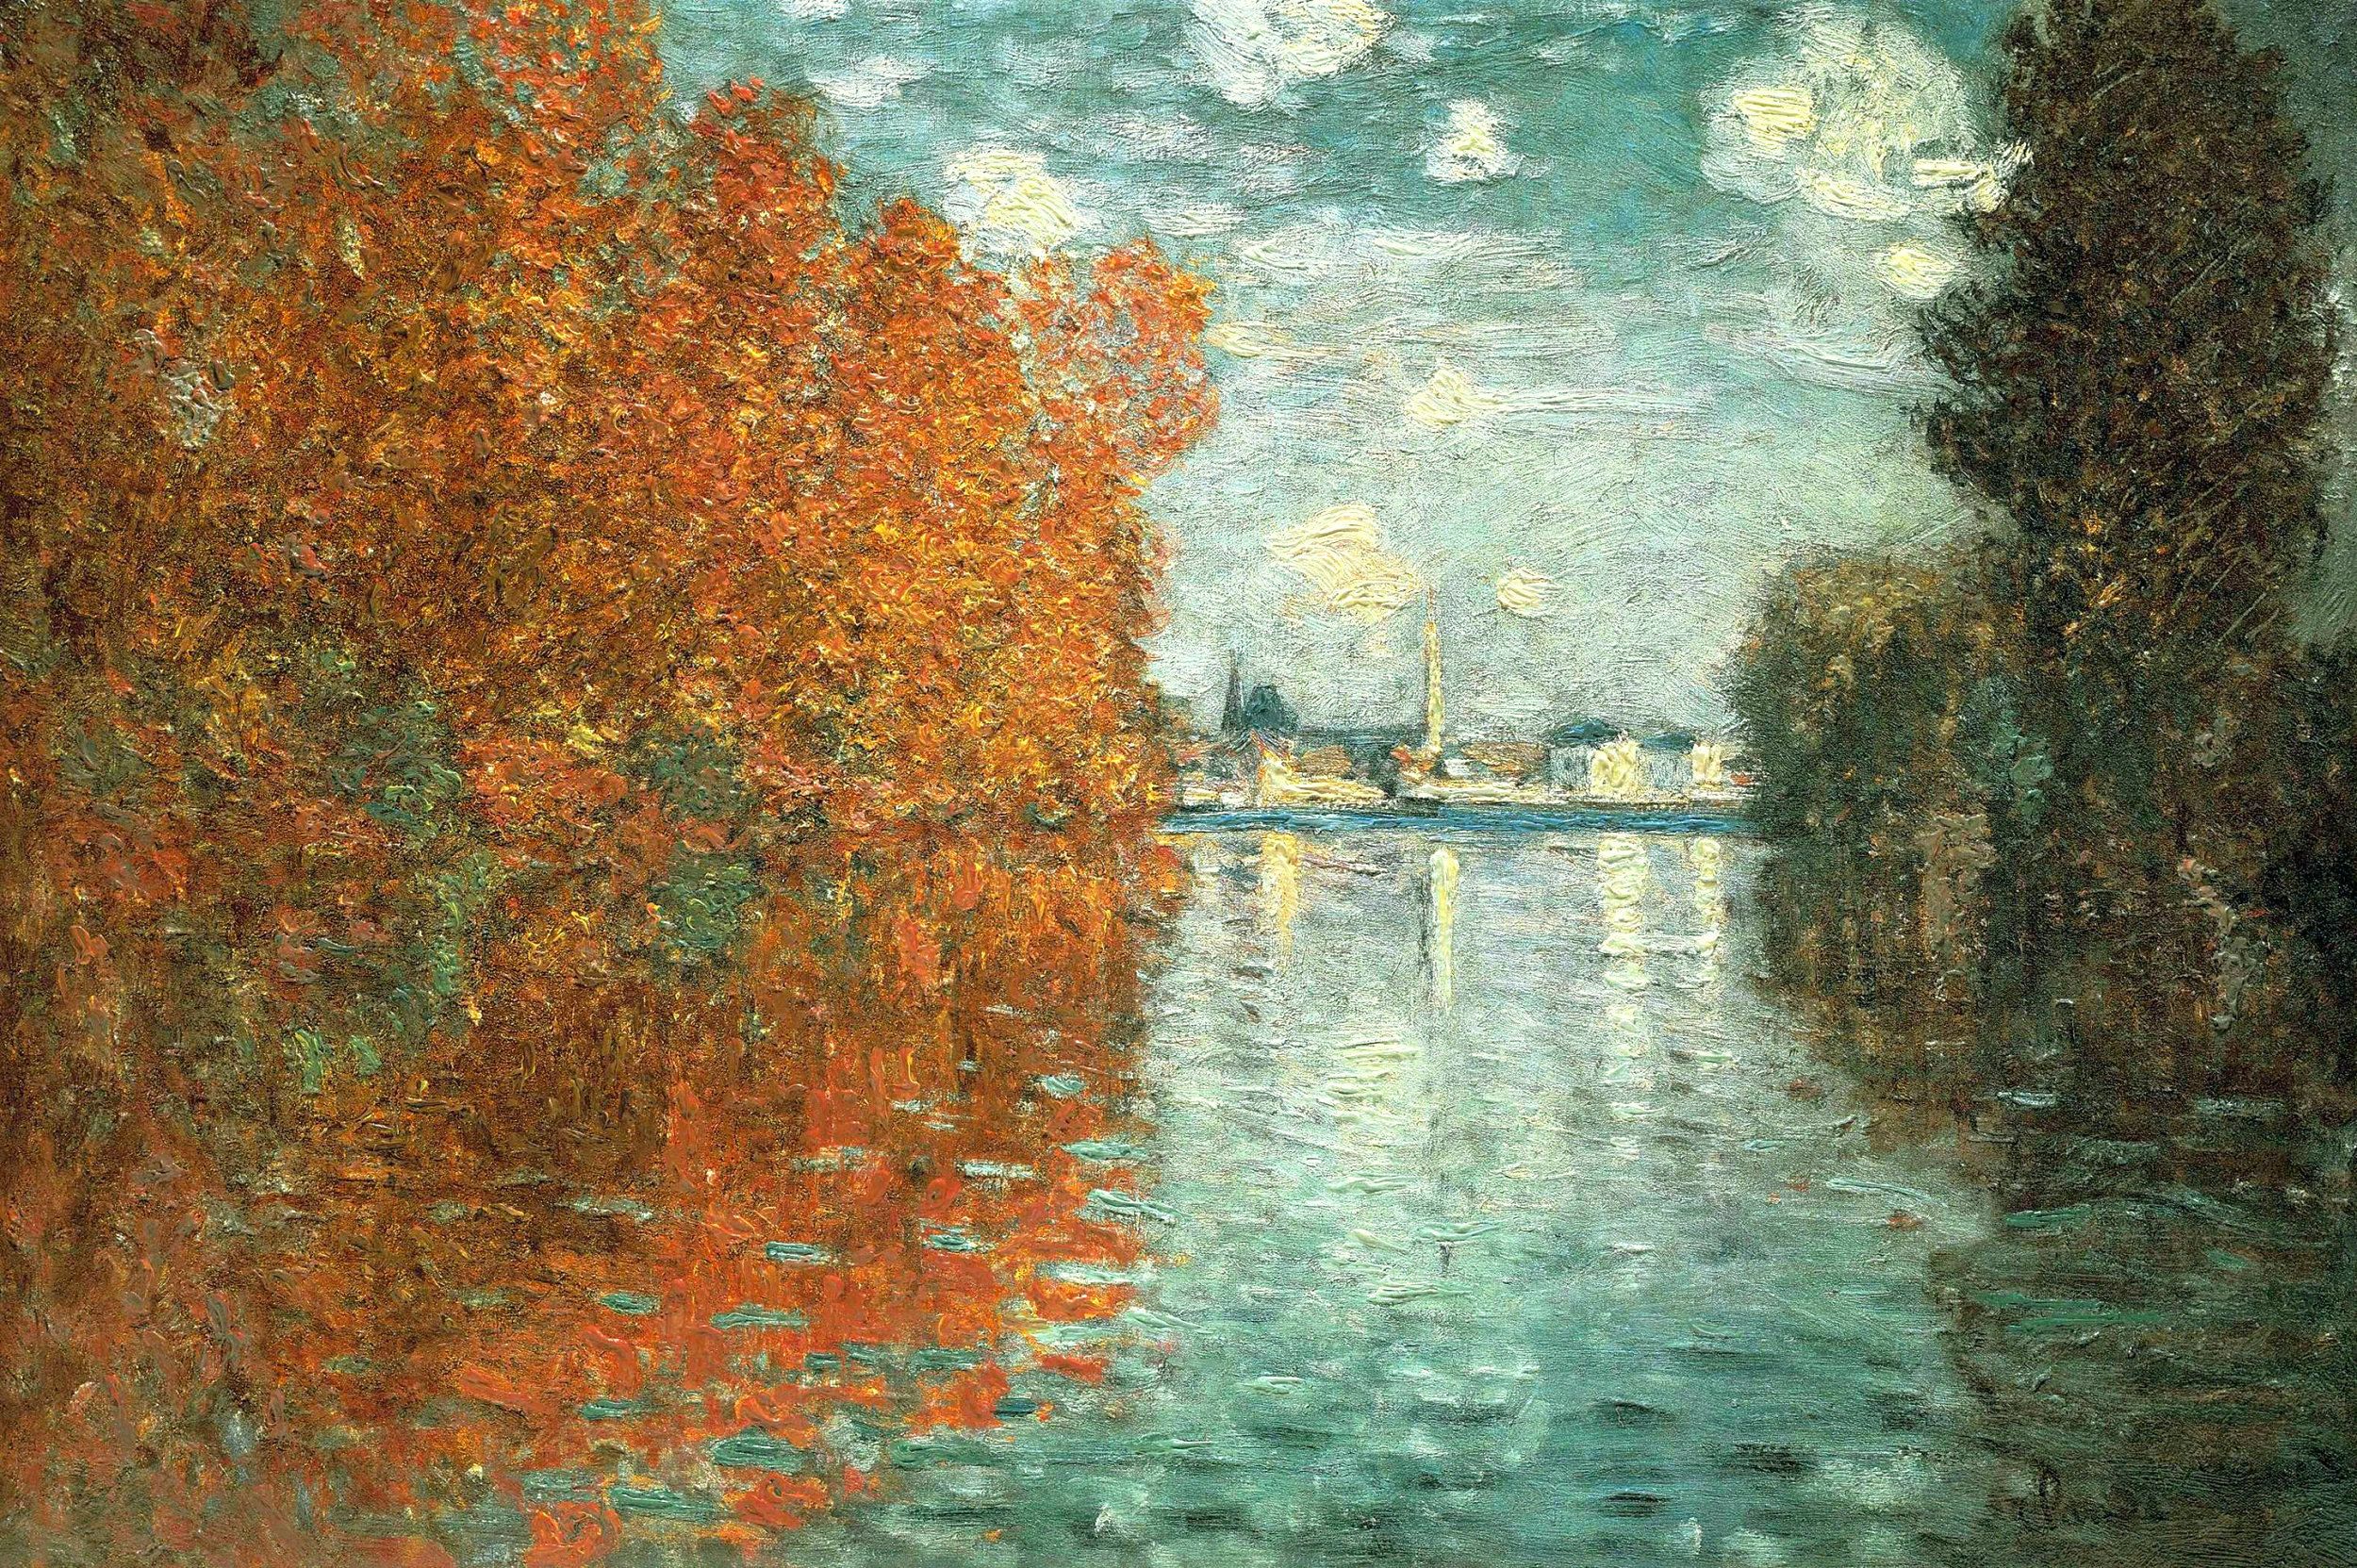 Painting Monet - Autumn effect wallpapers and images - wallpapers ...